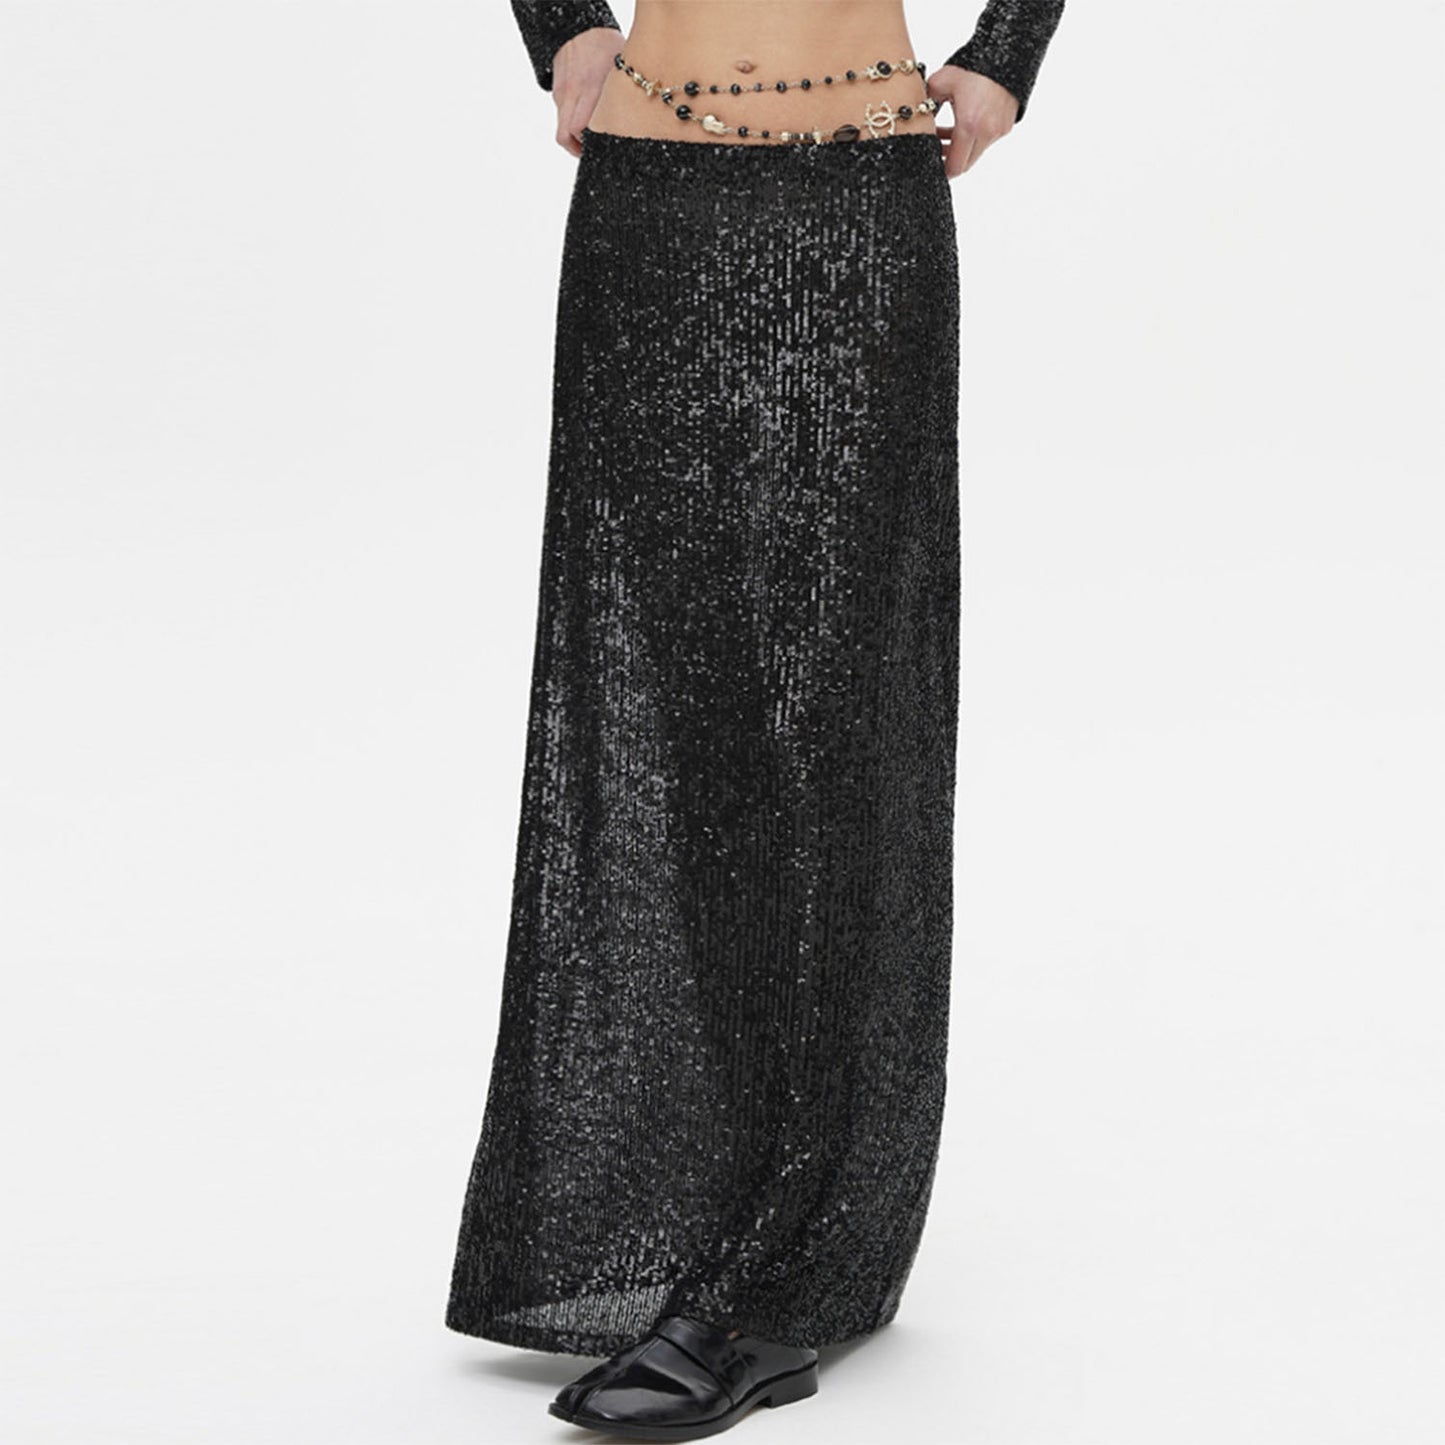 2023 Fashion Trends | NYE Aesthetic Long Sleeve Crop Top Maxi Skirt Outfit